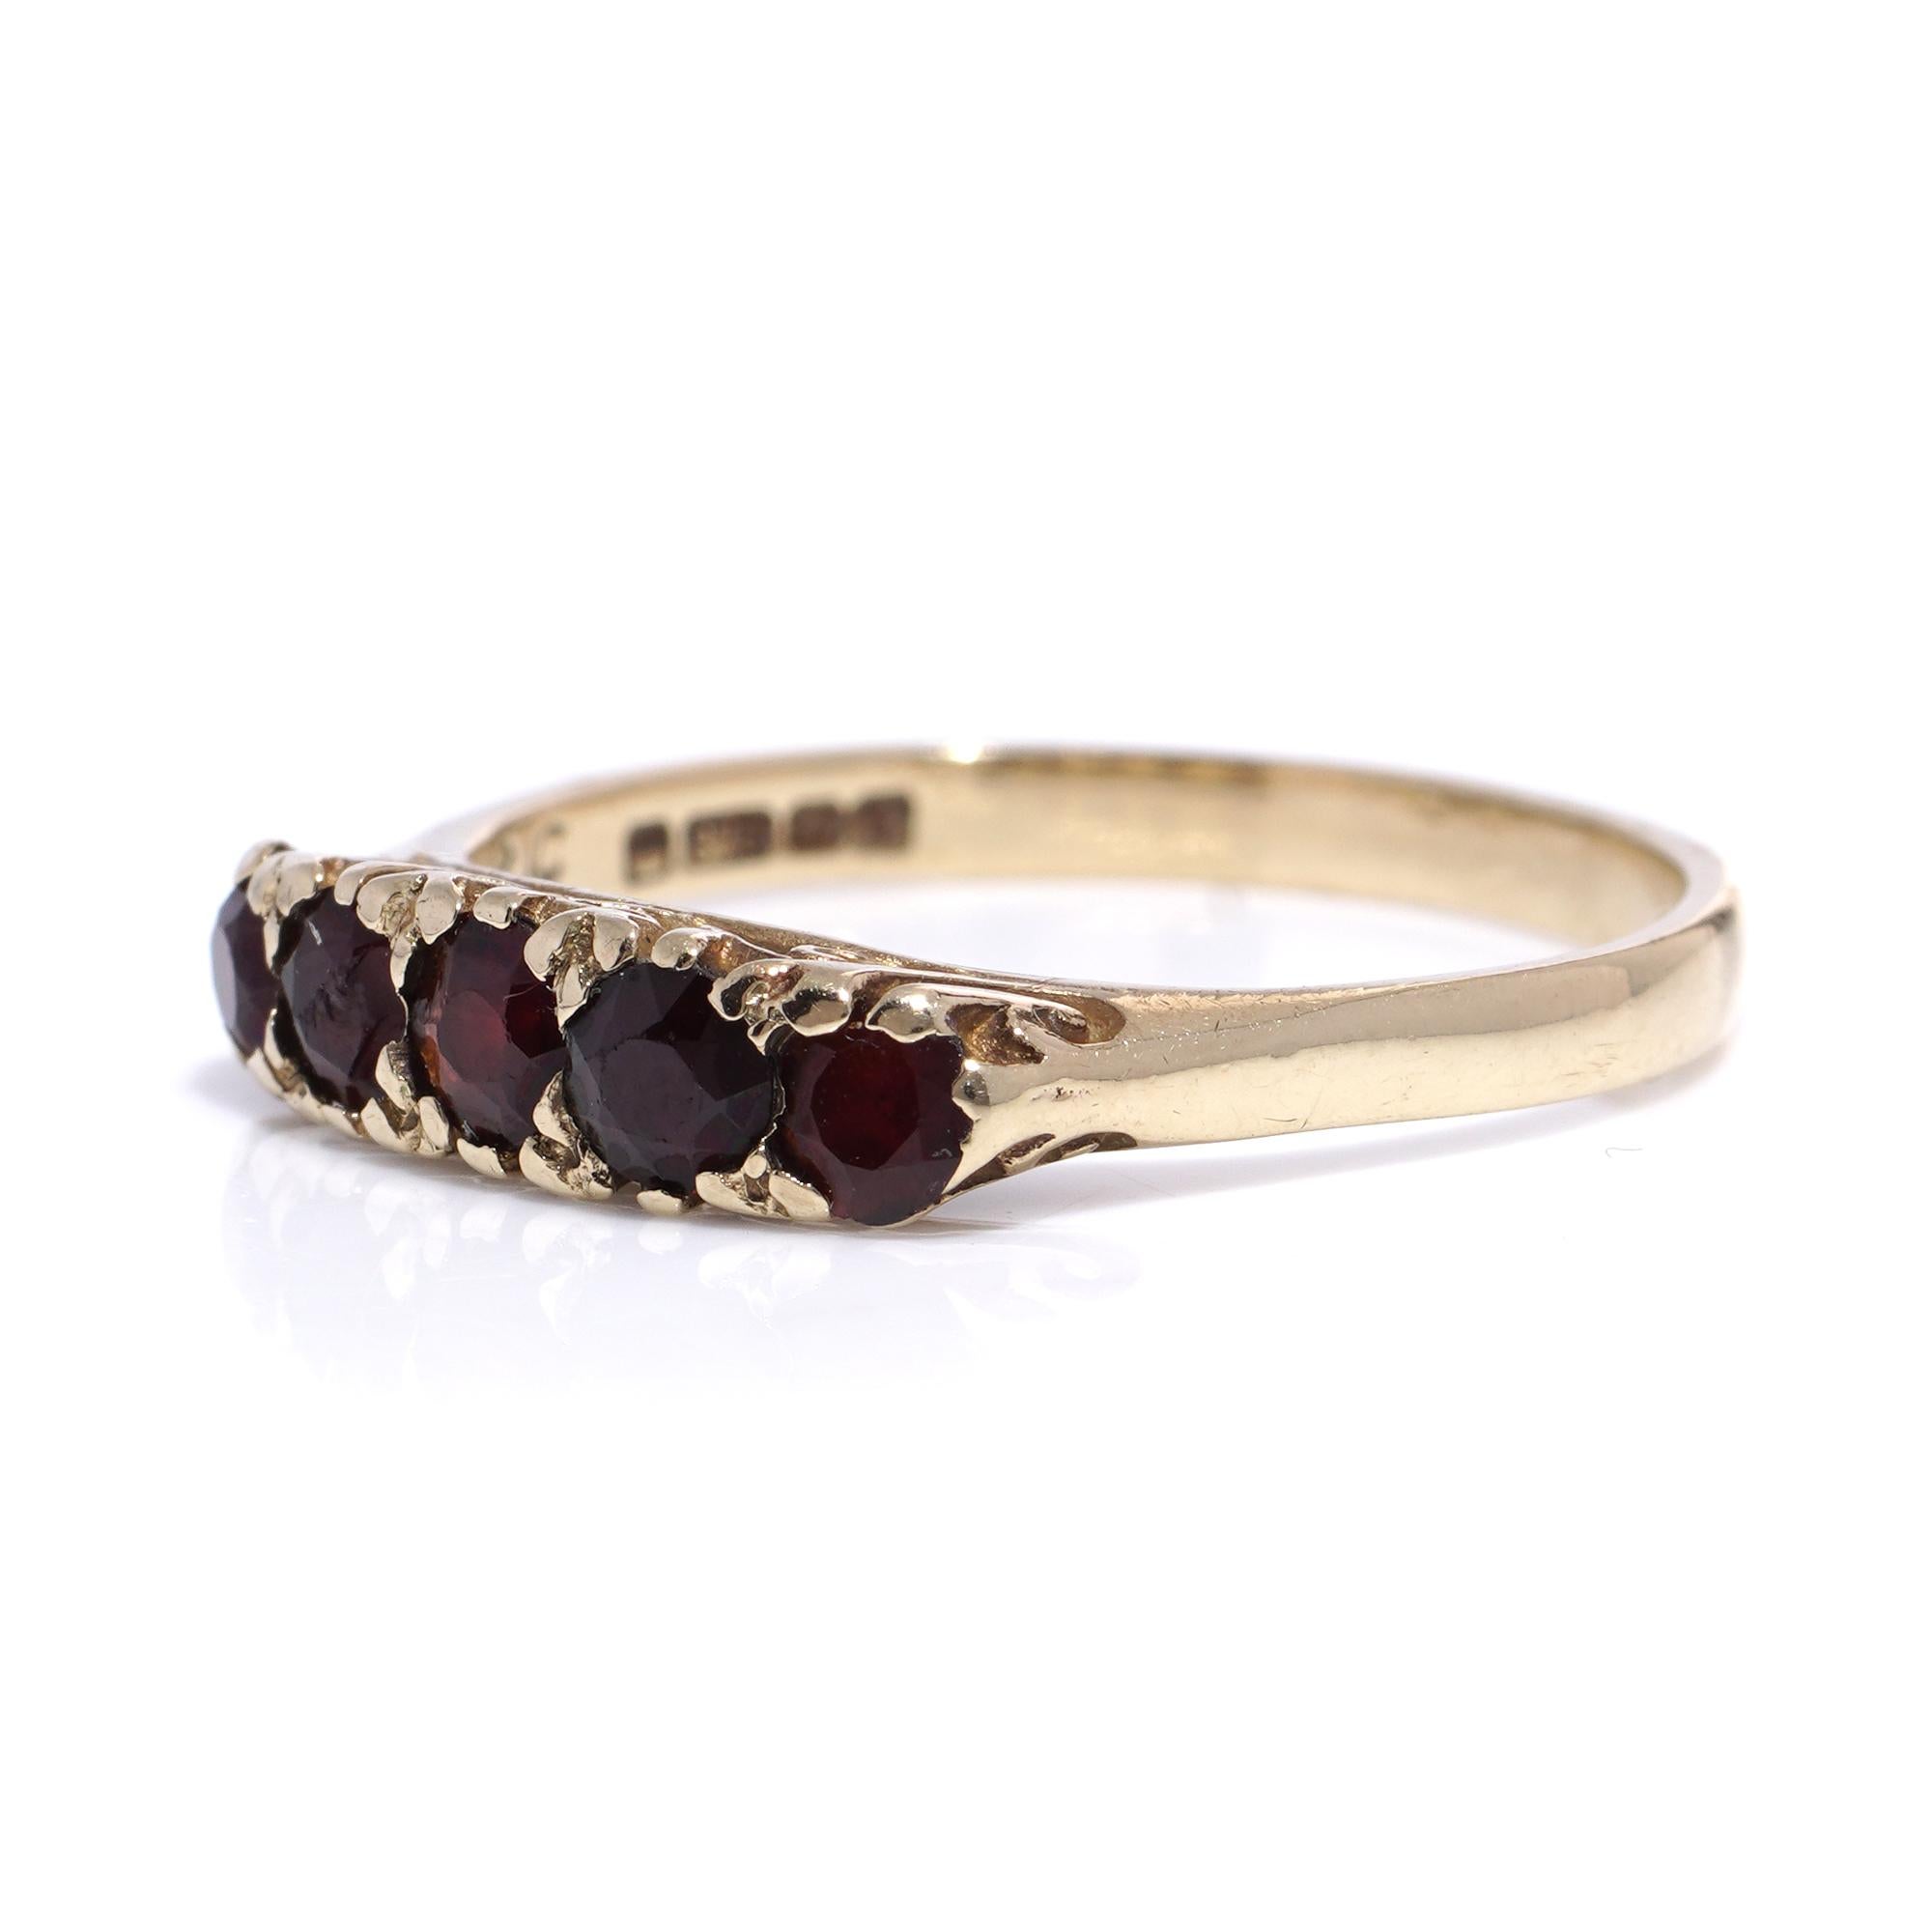 Vintage 9kt yellow gold five-stone garnet ring In Fair Condition For Sale In Braintree, GB